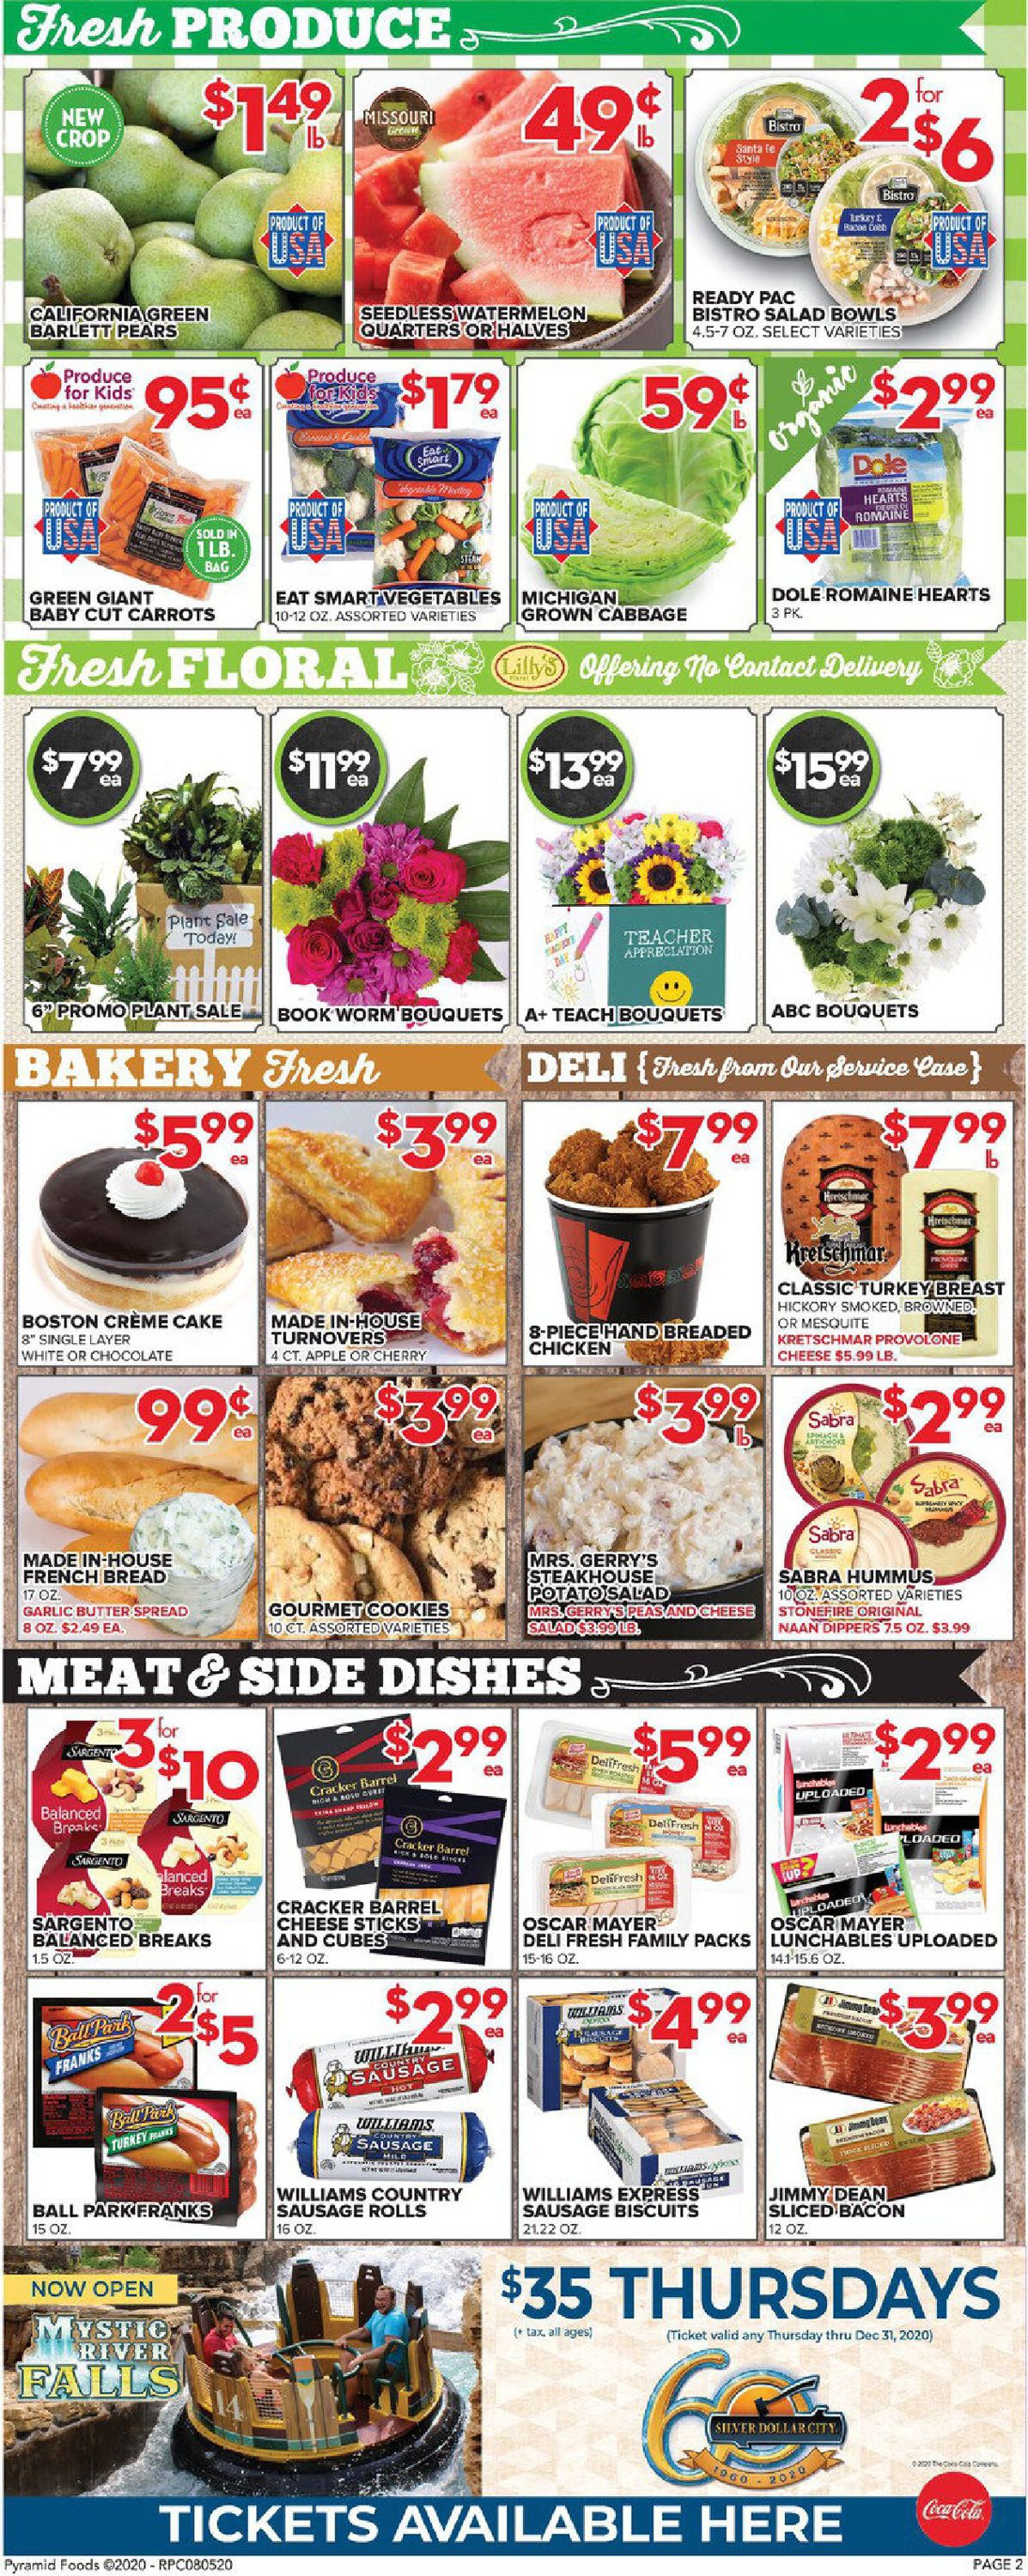 Price Cutter Weekly Ad Circular - valid 08/05-08/11/2020 (Page 2)